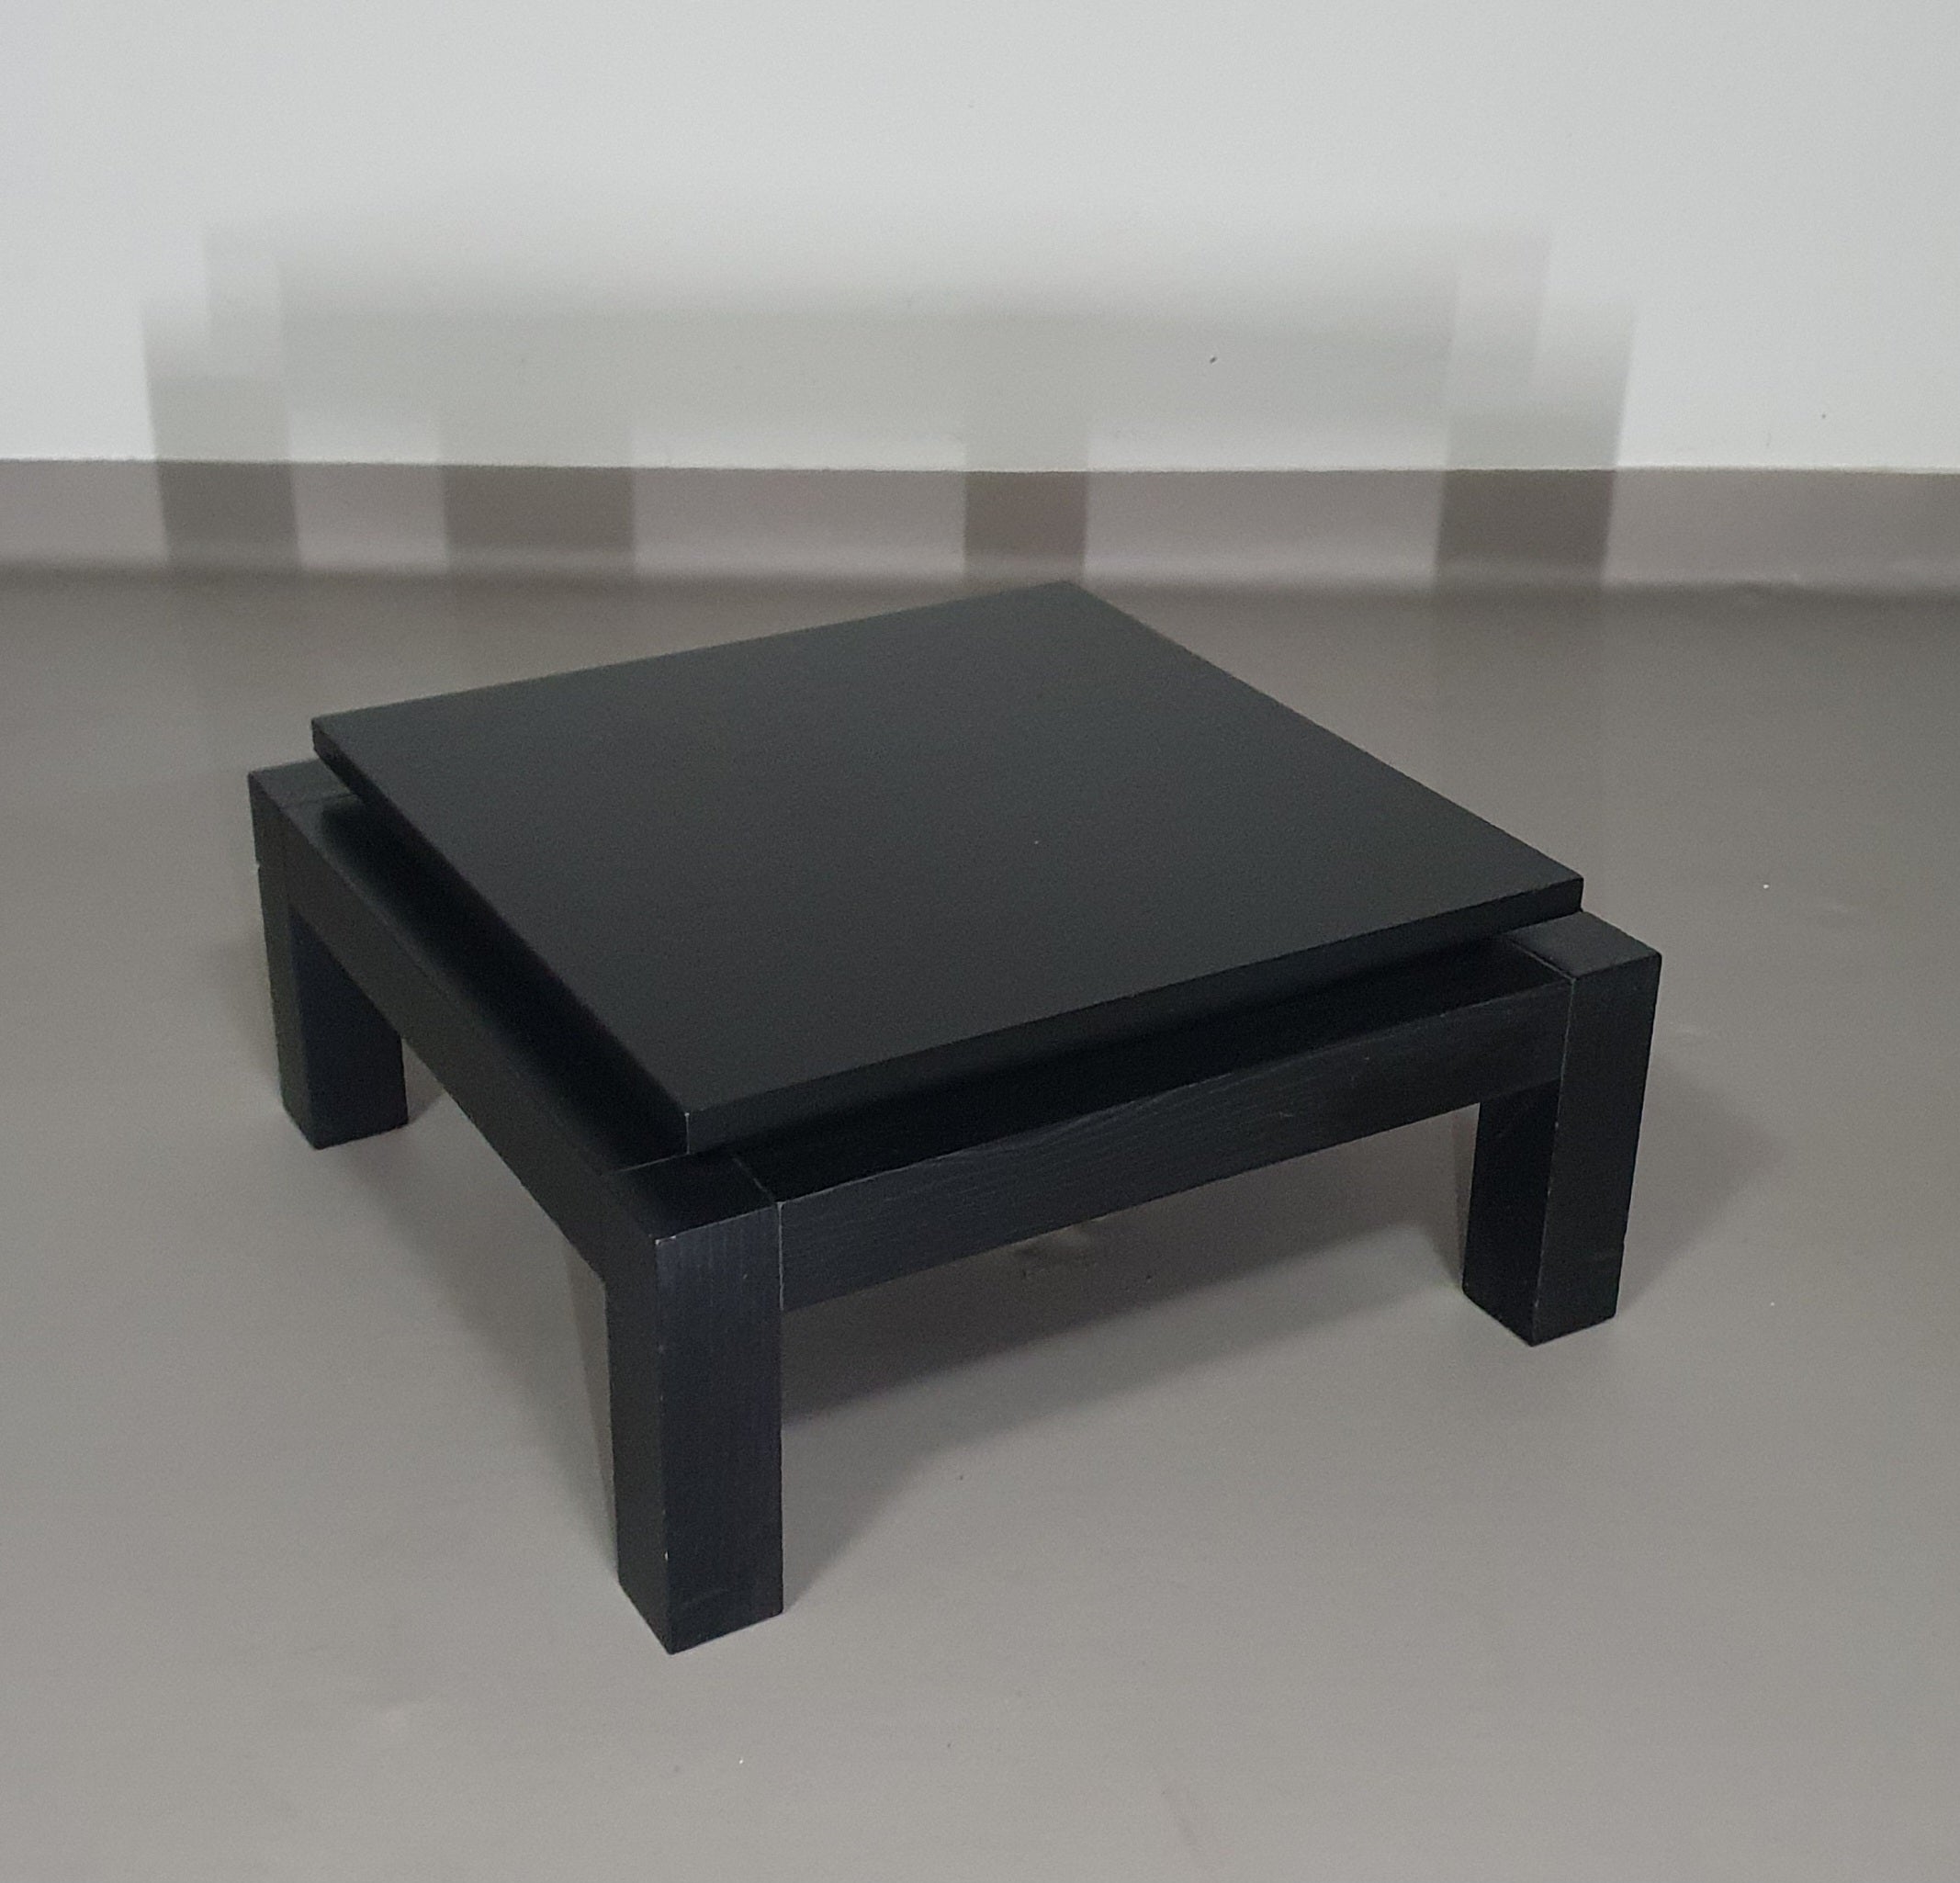 Solid wood Thonet coffee table.
The coffee table from the 6001 series was designed in 1986 by Wolf Schneider and Ulrich Böhme